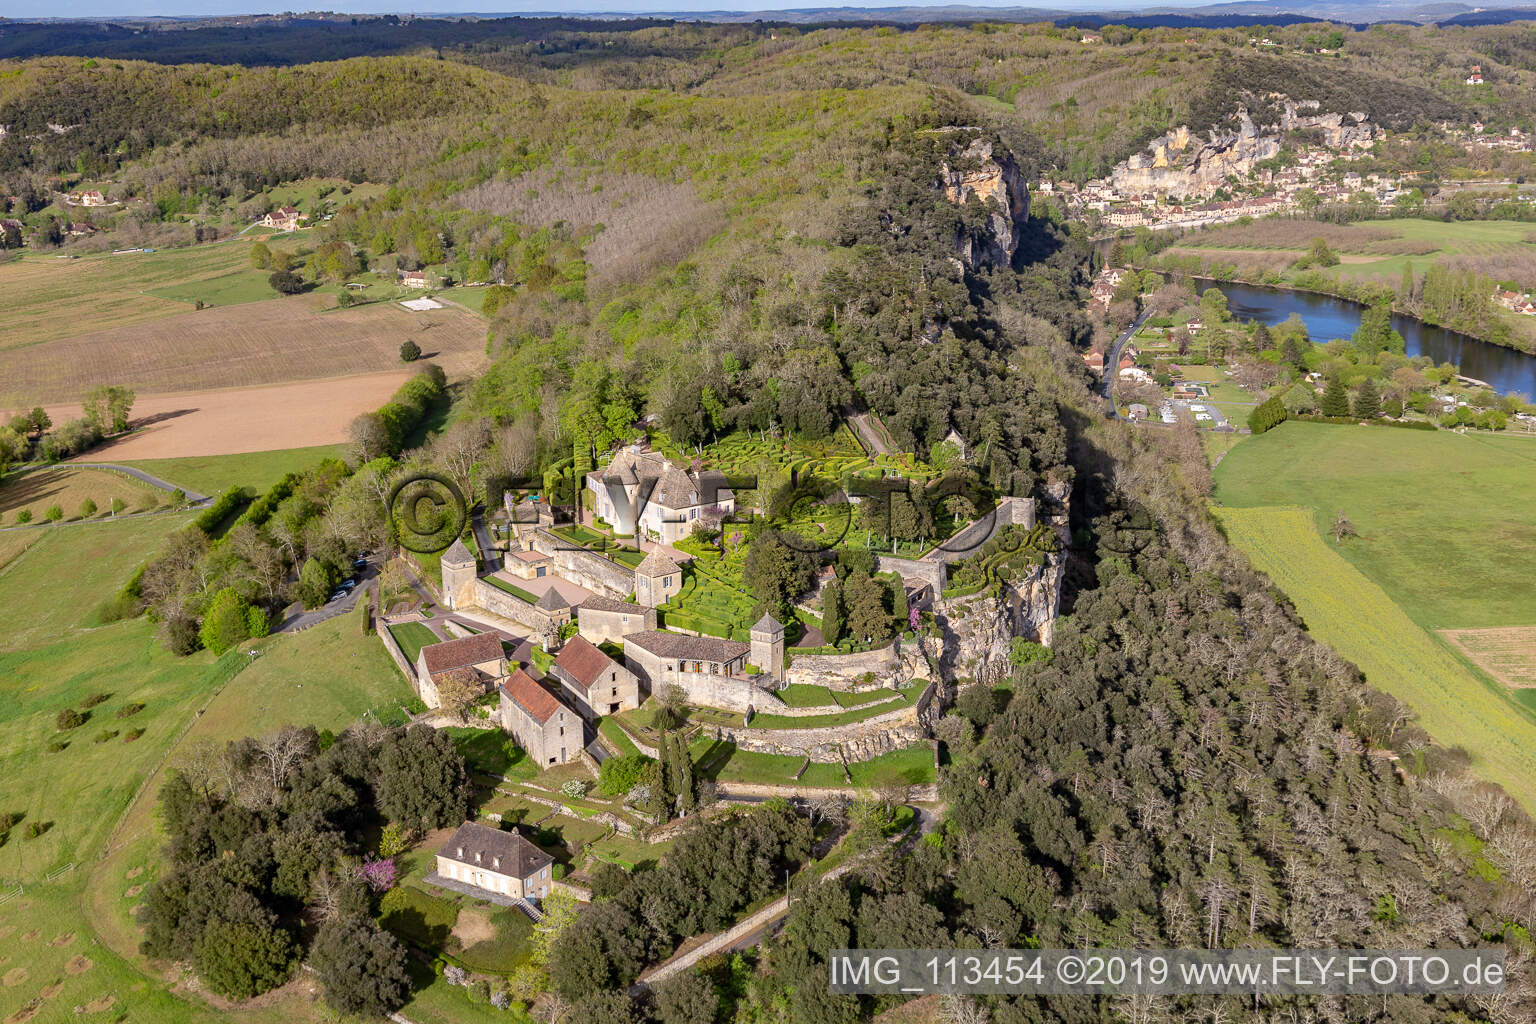 Oblique view of Park and gardenss of the castle Marqueyssac above the Dordogne in Vezac in Nouvelle-Aquitaine, France